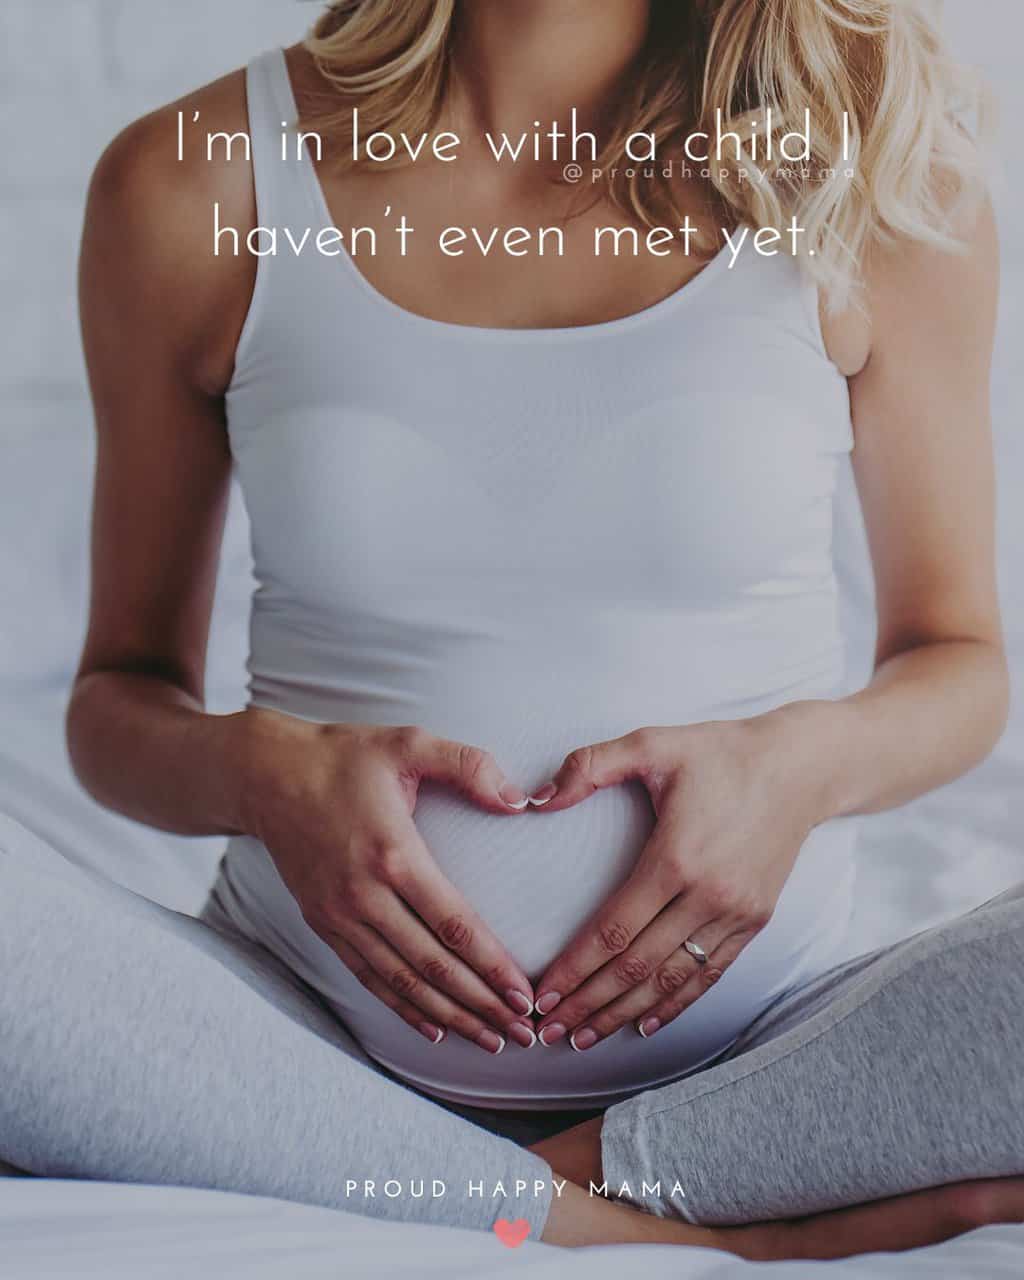 Quotes for mother to be - 'I’m in love with a child I haven’t even met yet.'